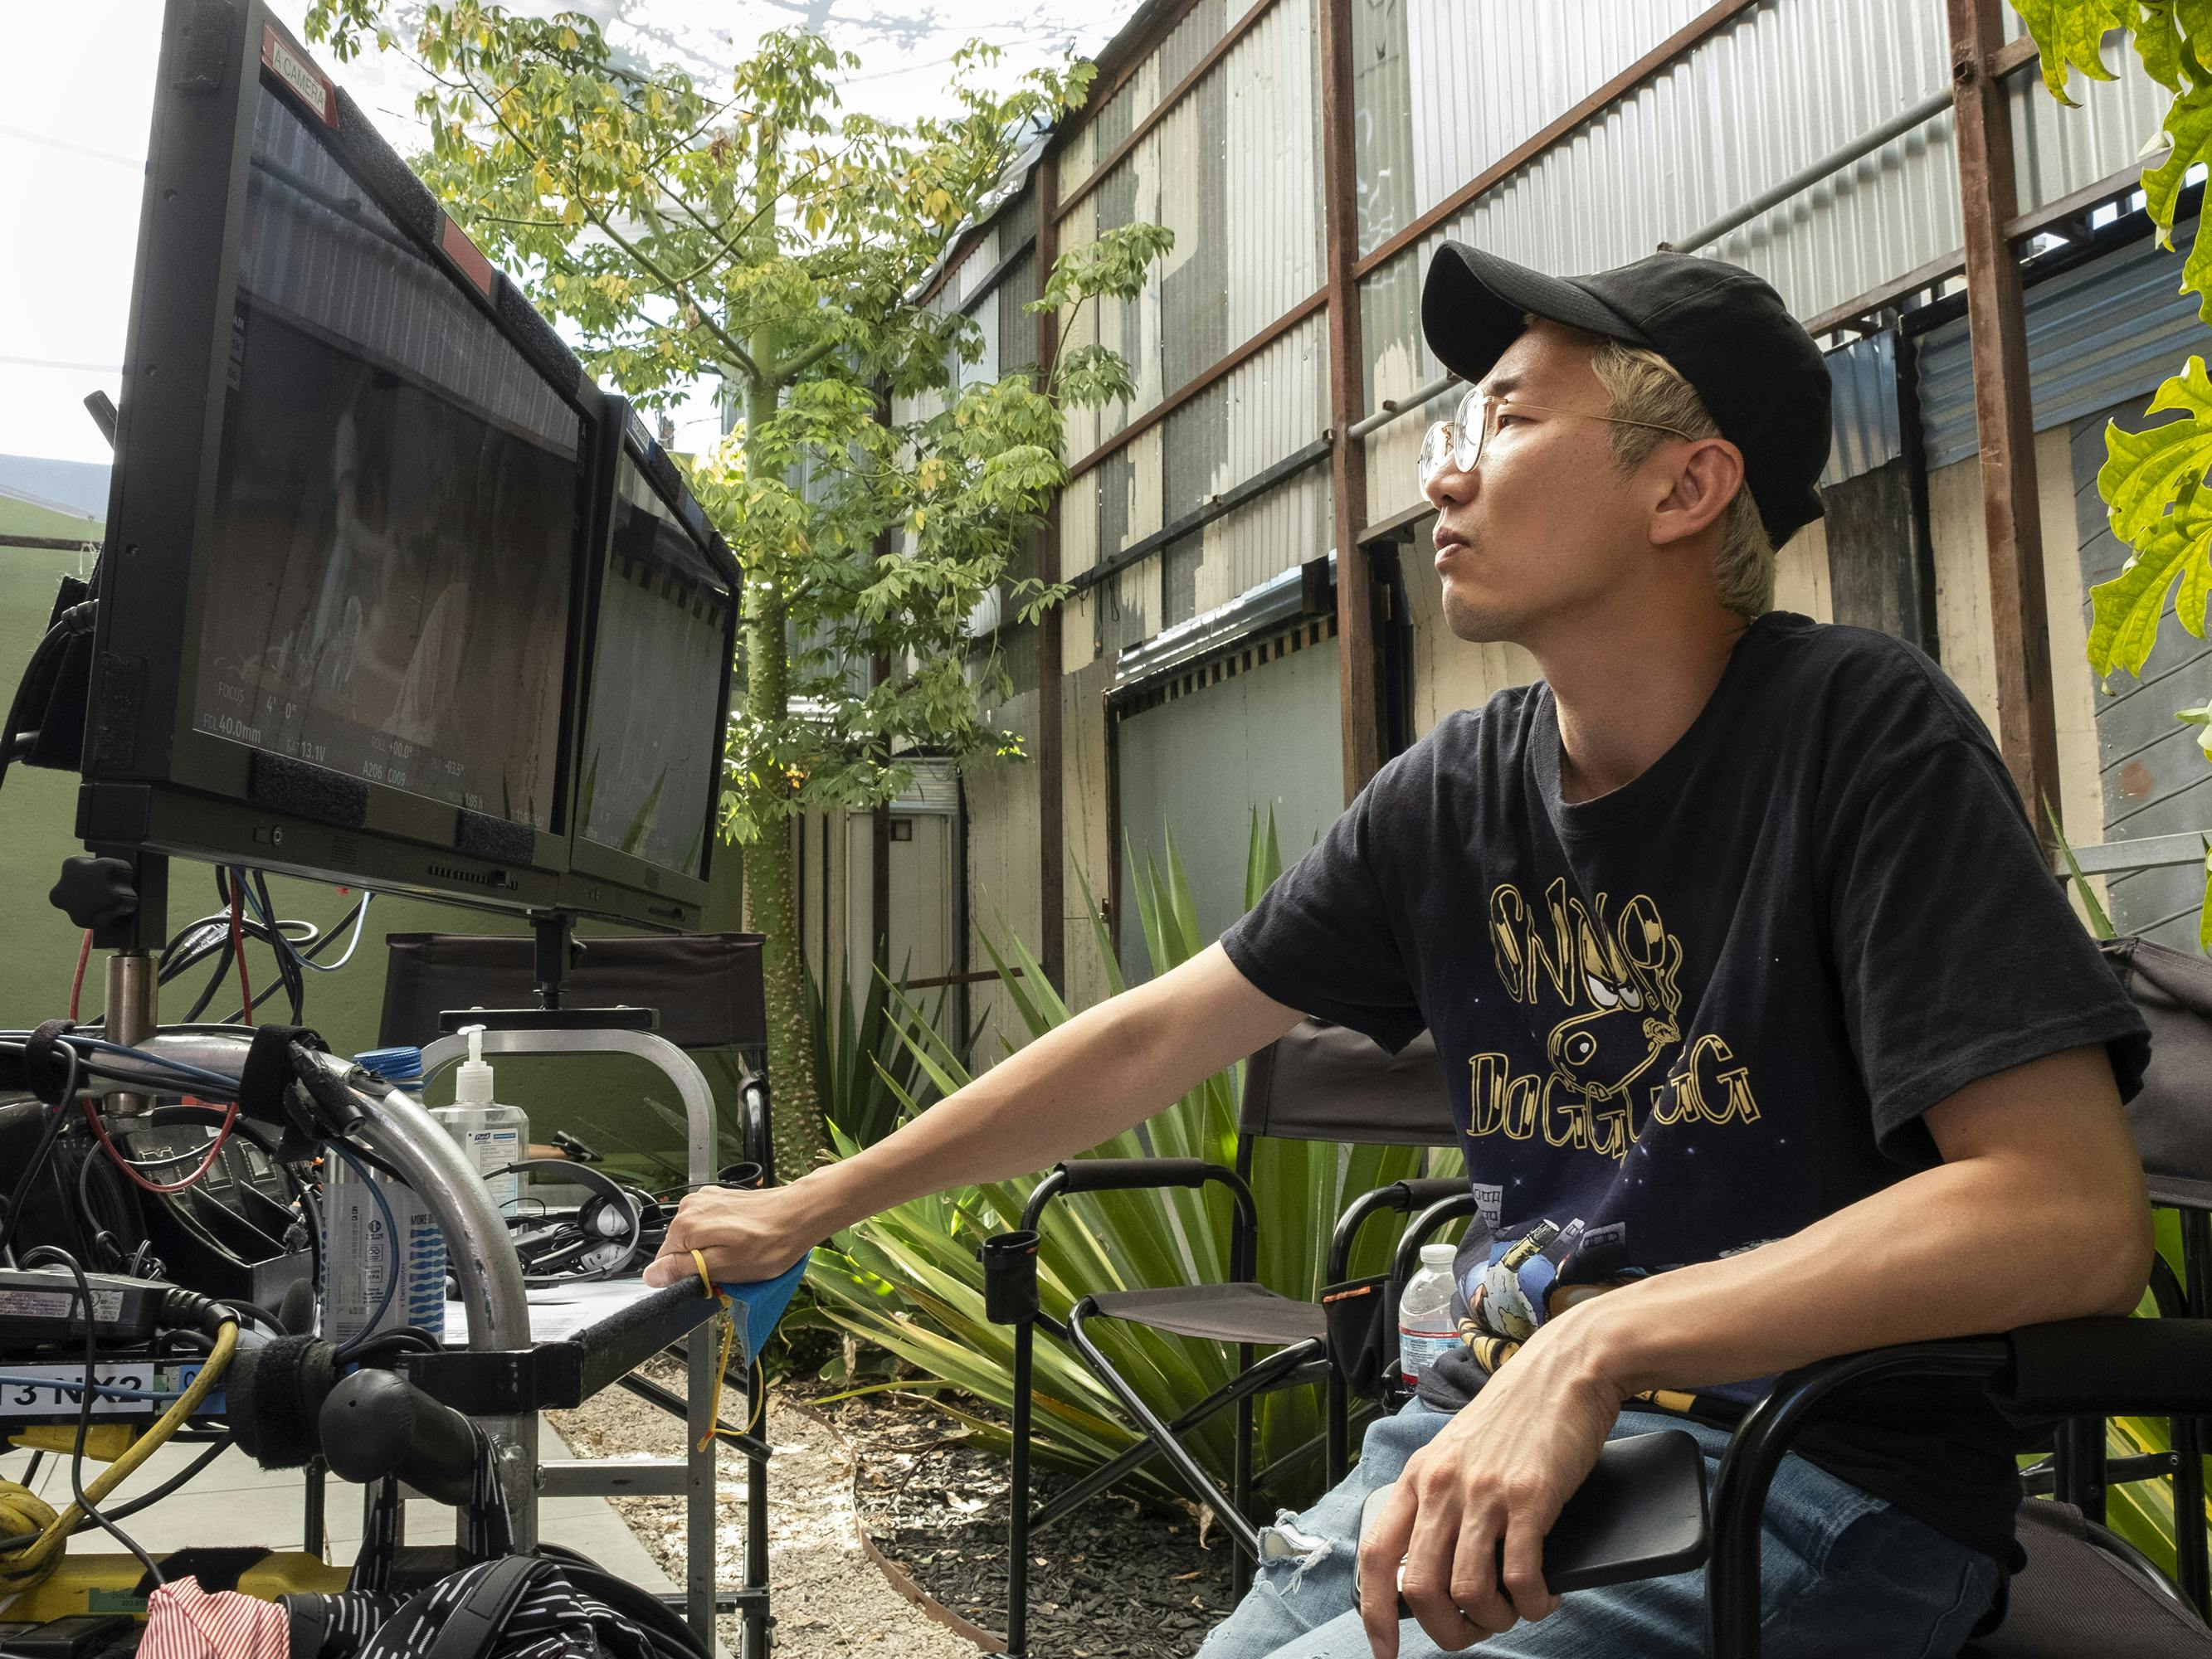 Lee Sung Jin wears all black — including a black baseball cap — and sits behind a monitor in a plant-filled outdoor space.